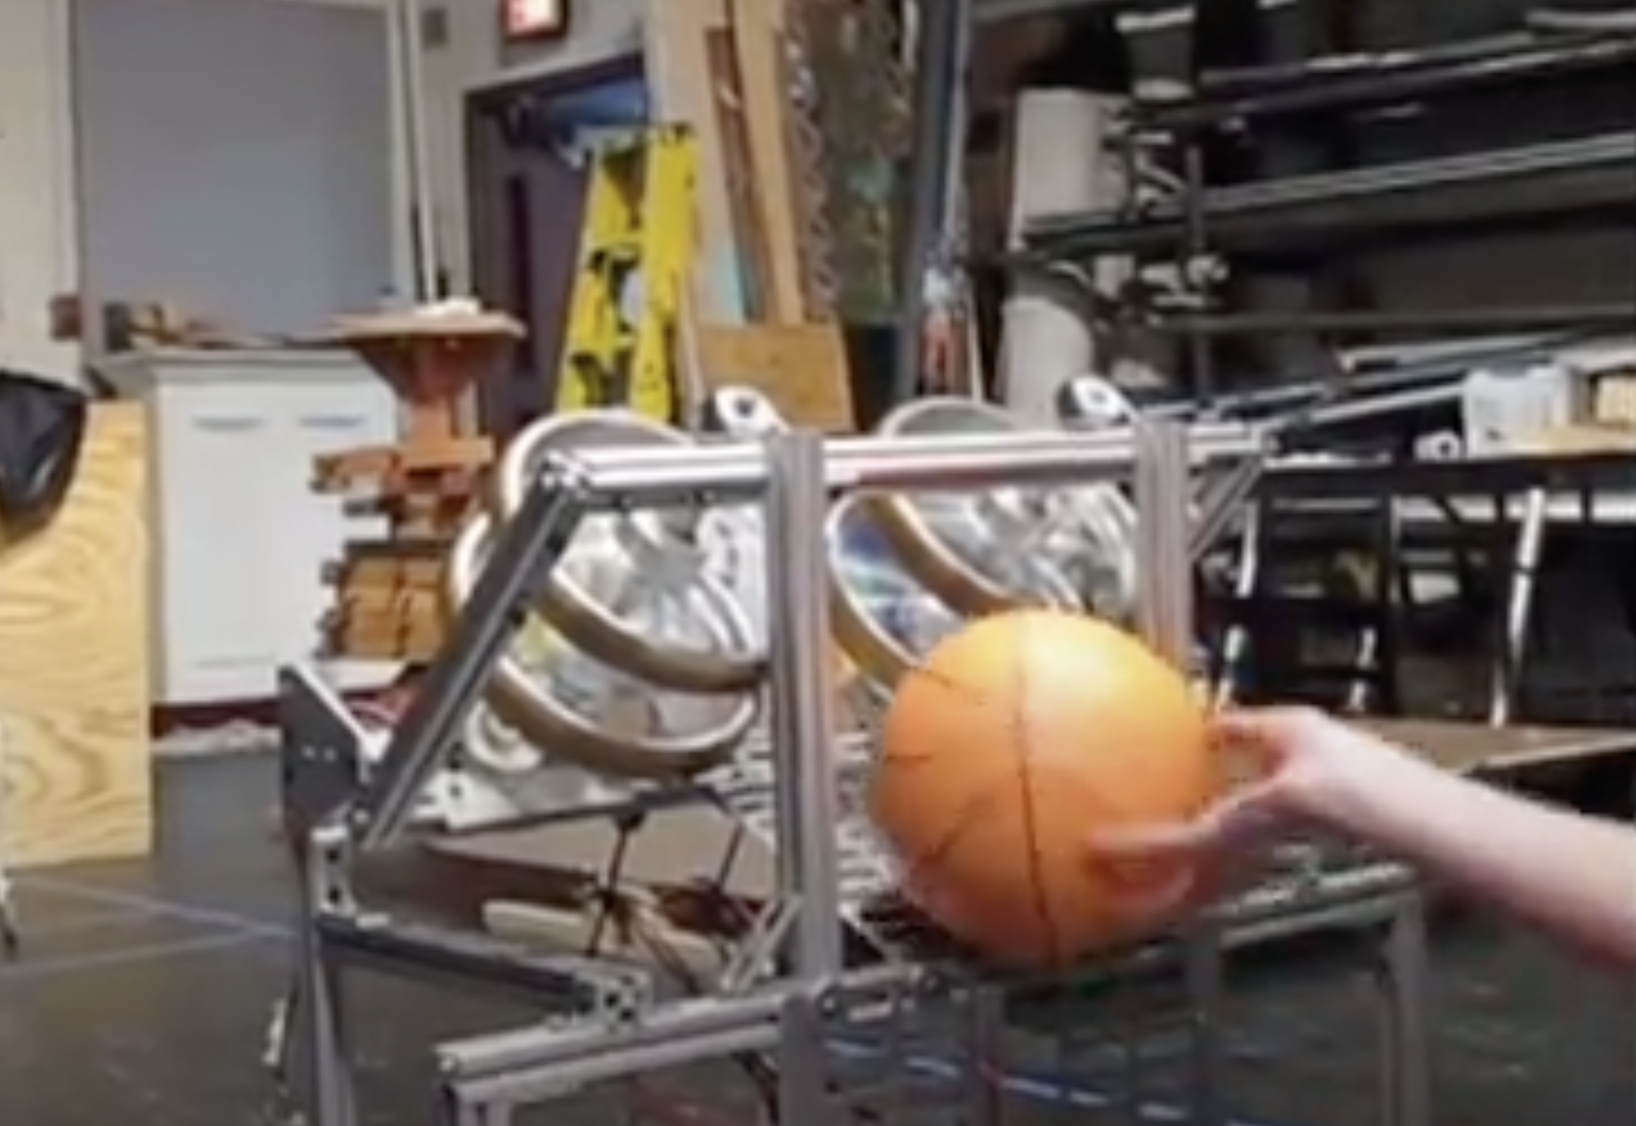 The 2013 robot about to launch a basketball.